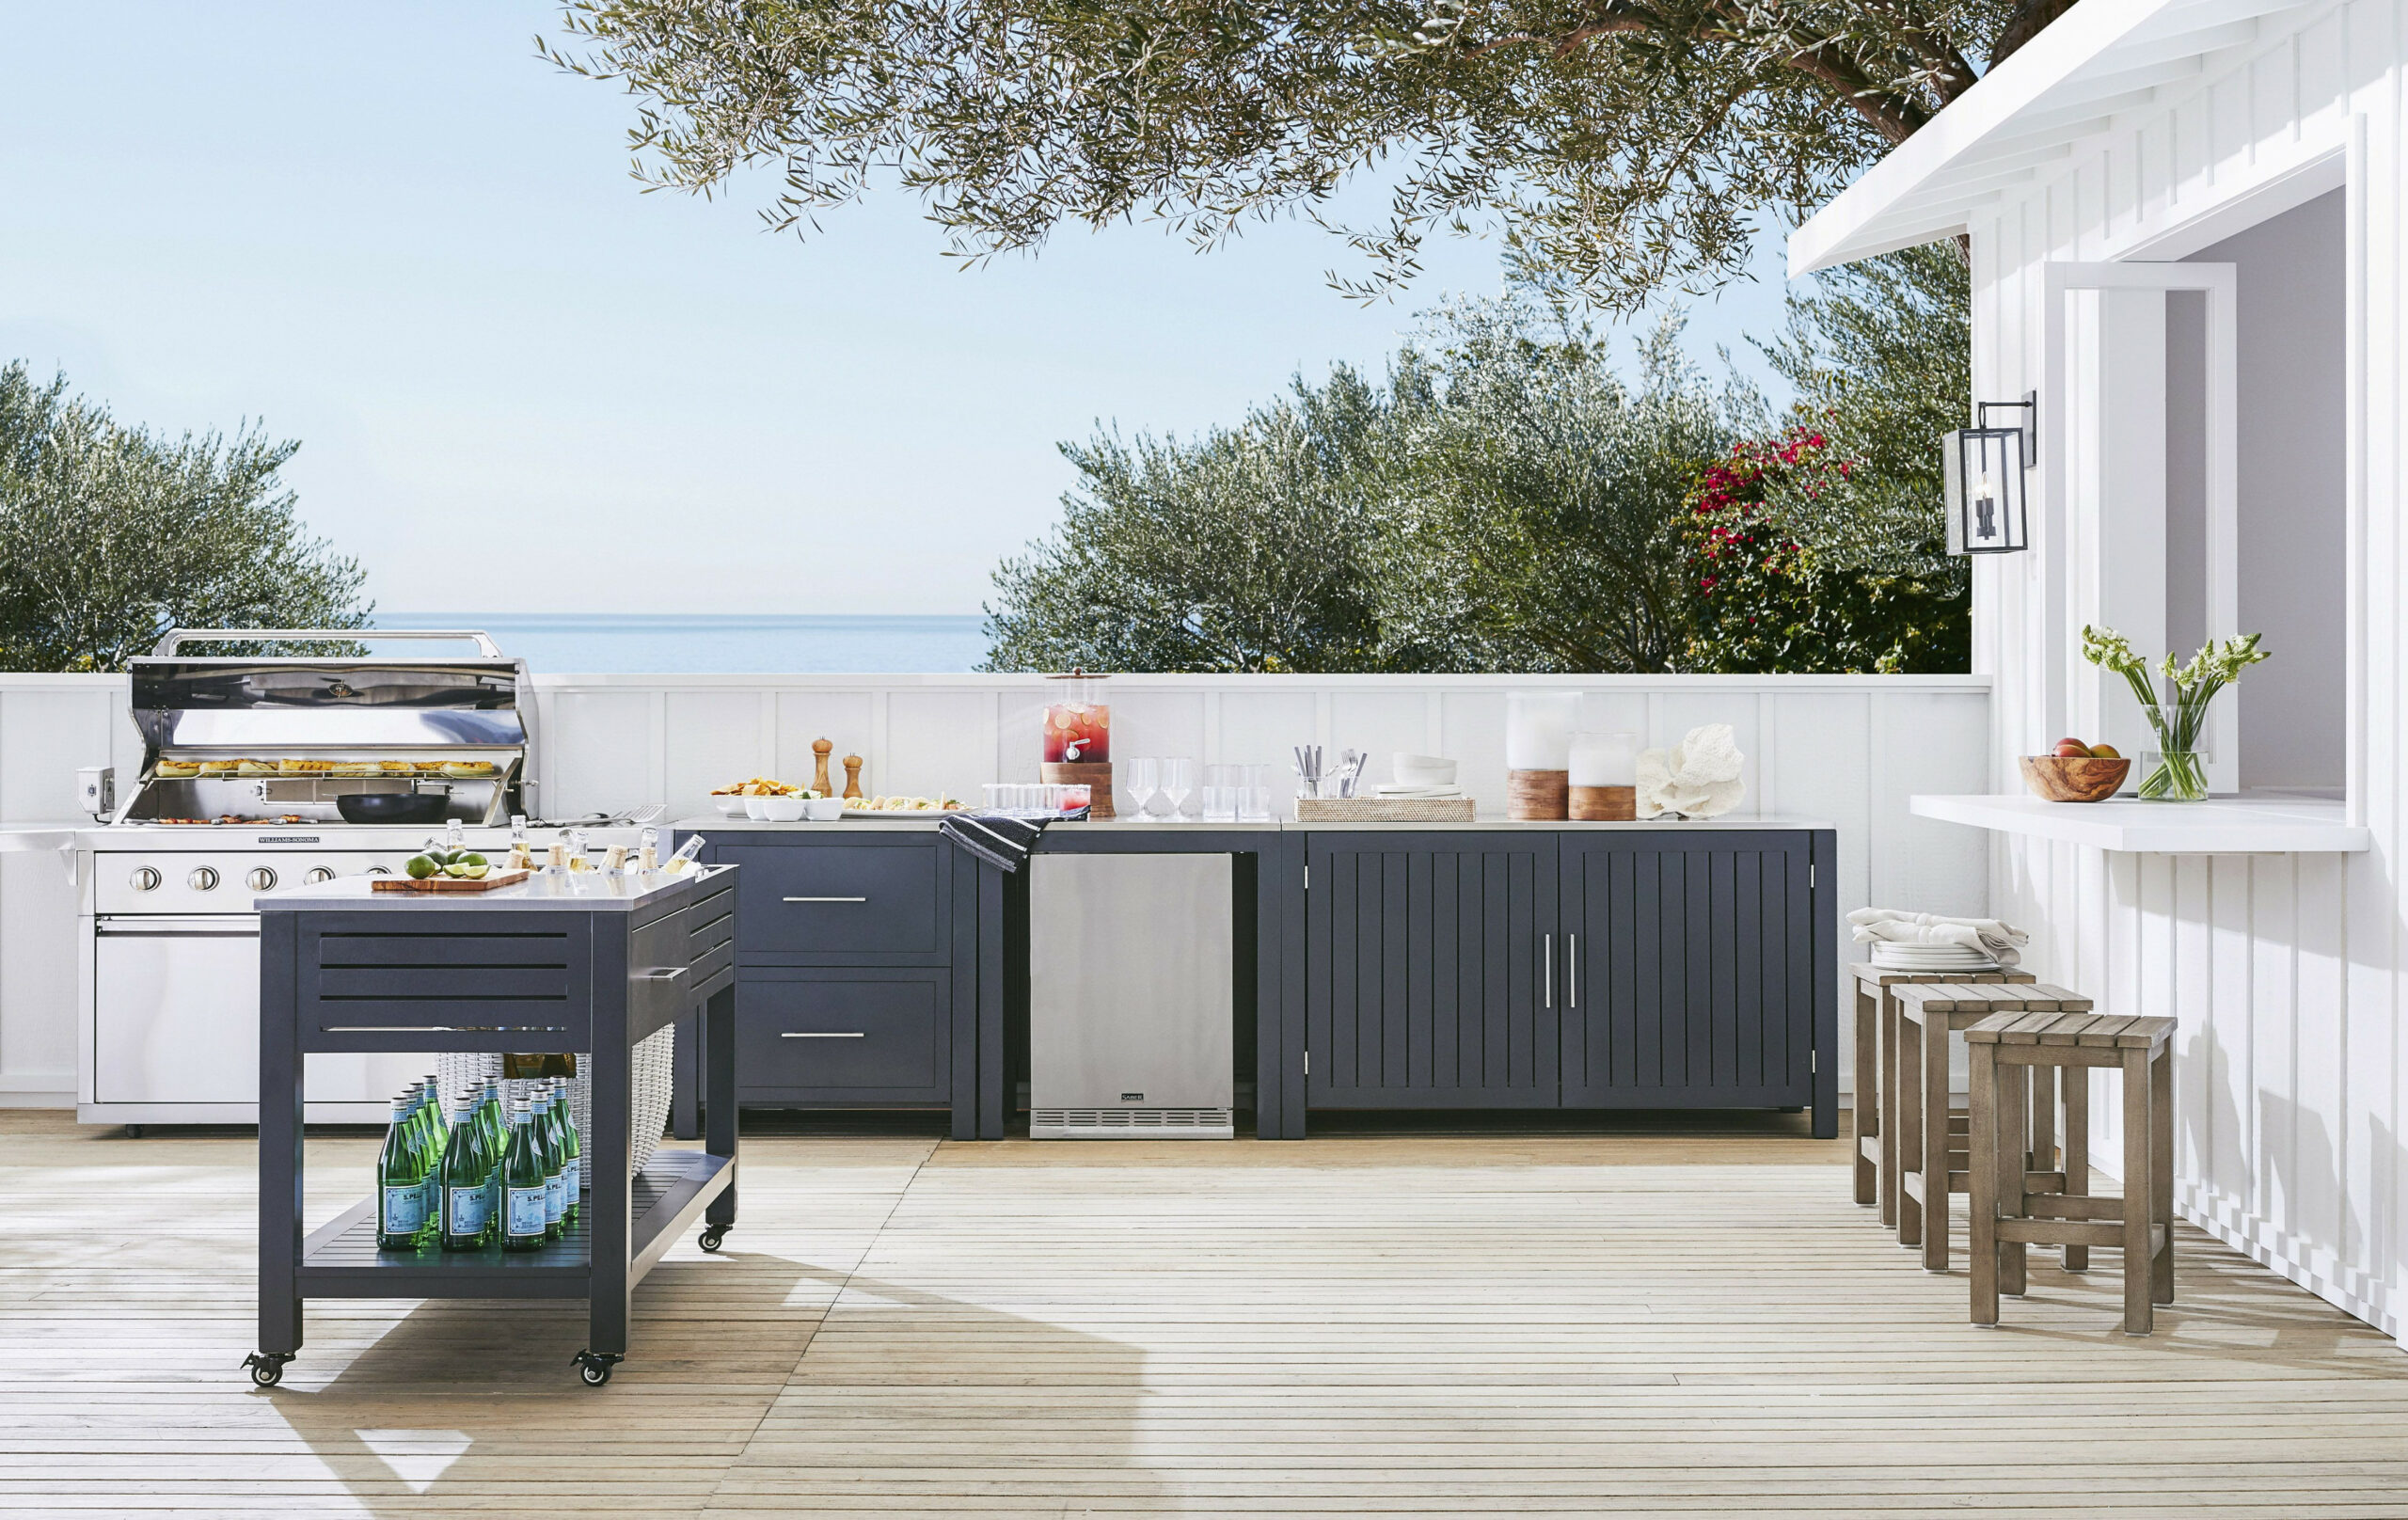 How to Create a Life-Changing Outdoor Kitchen at Home